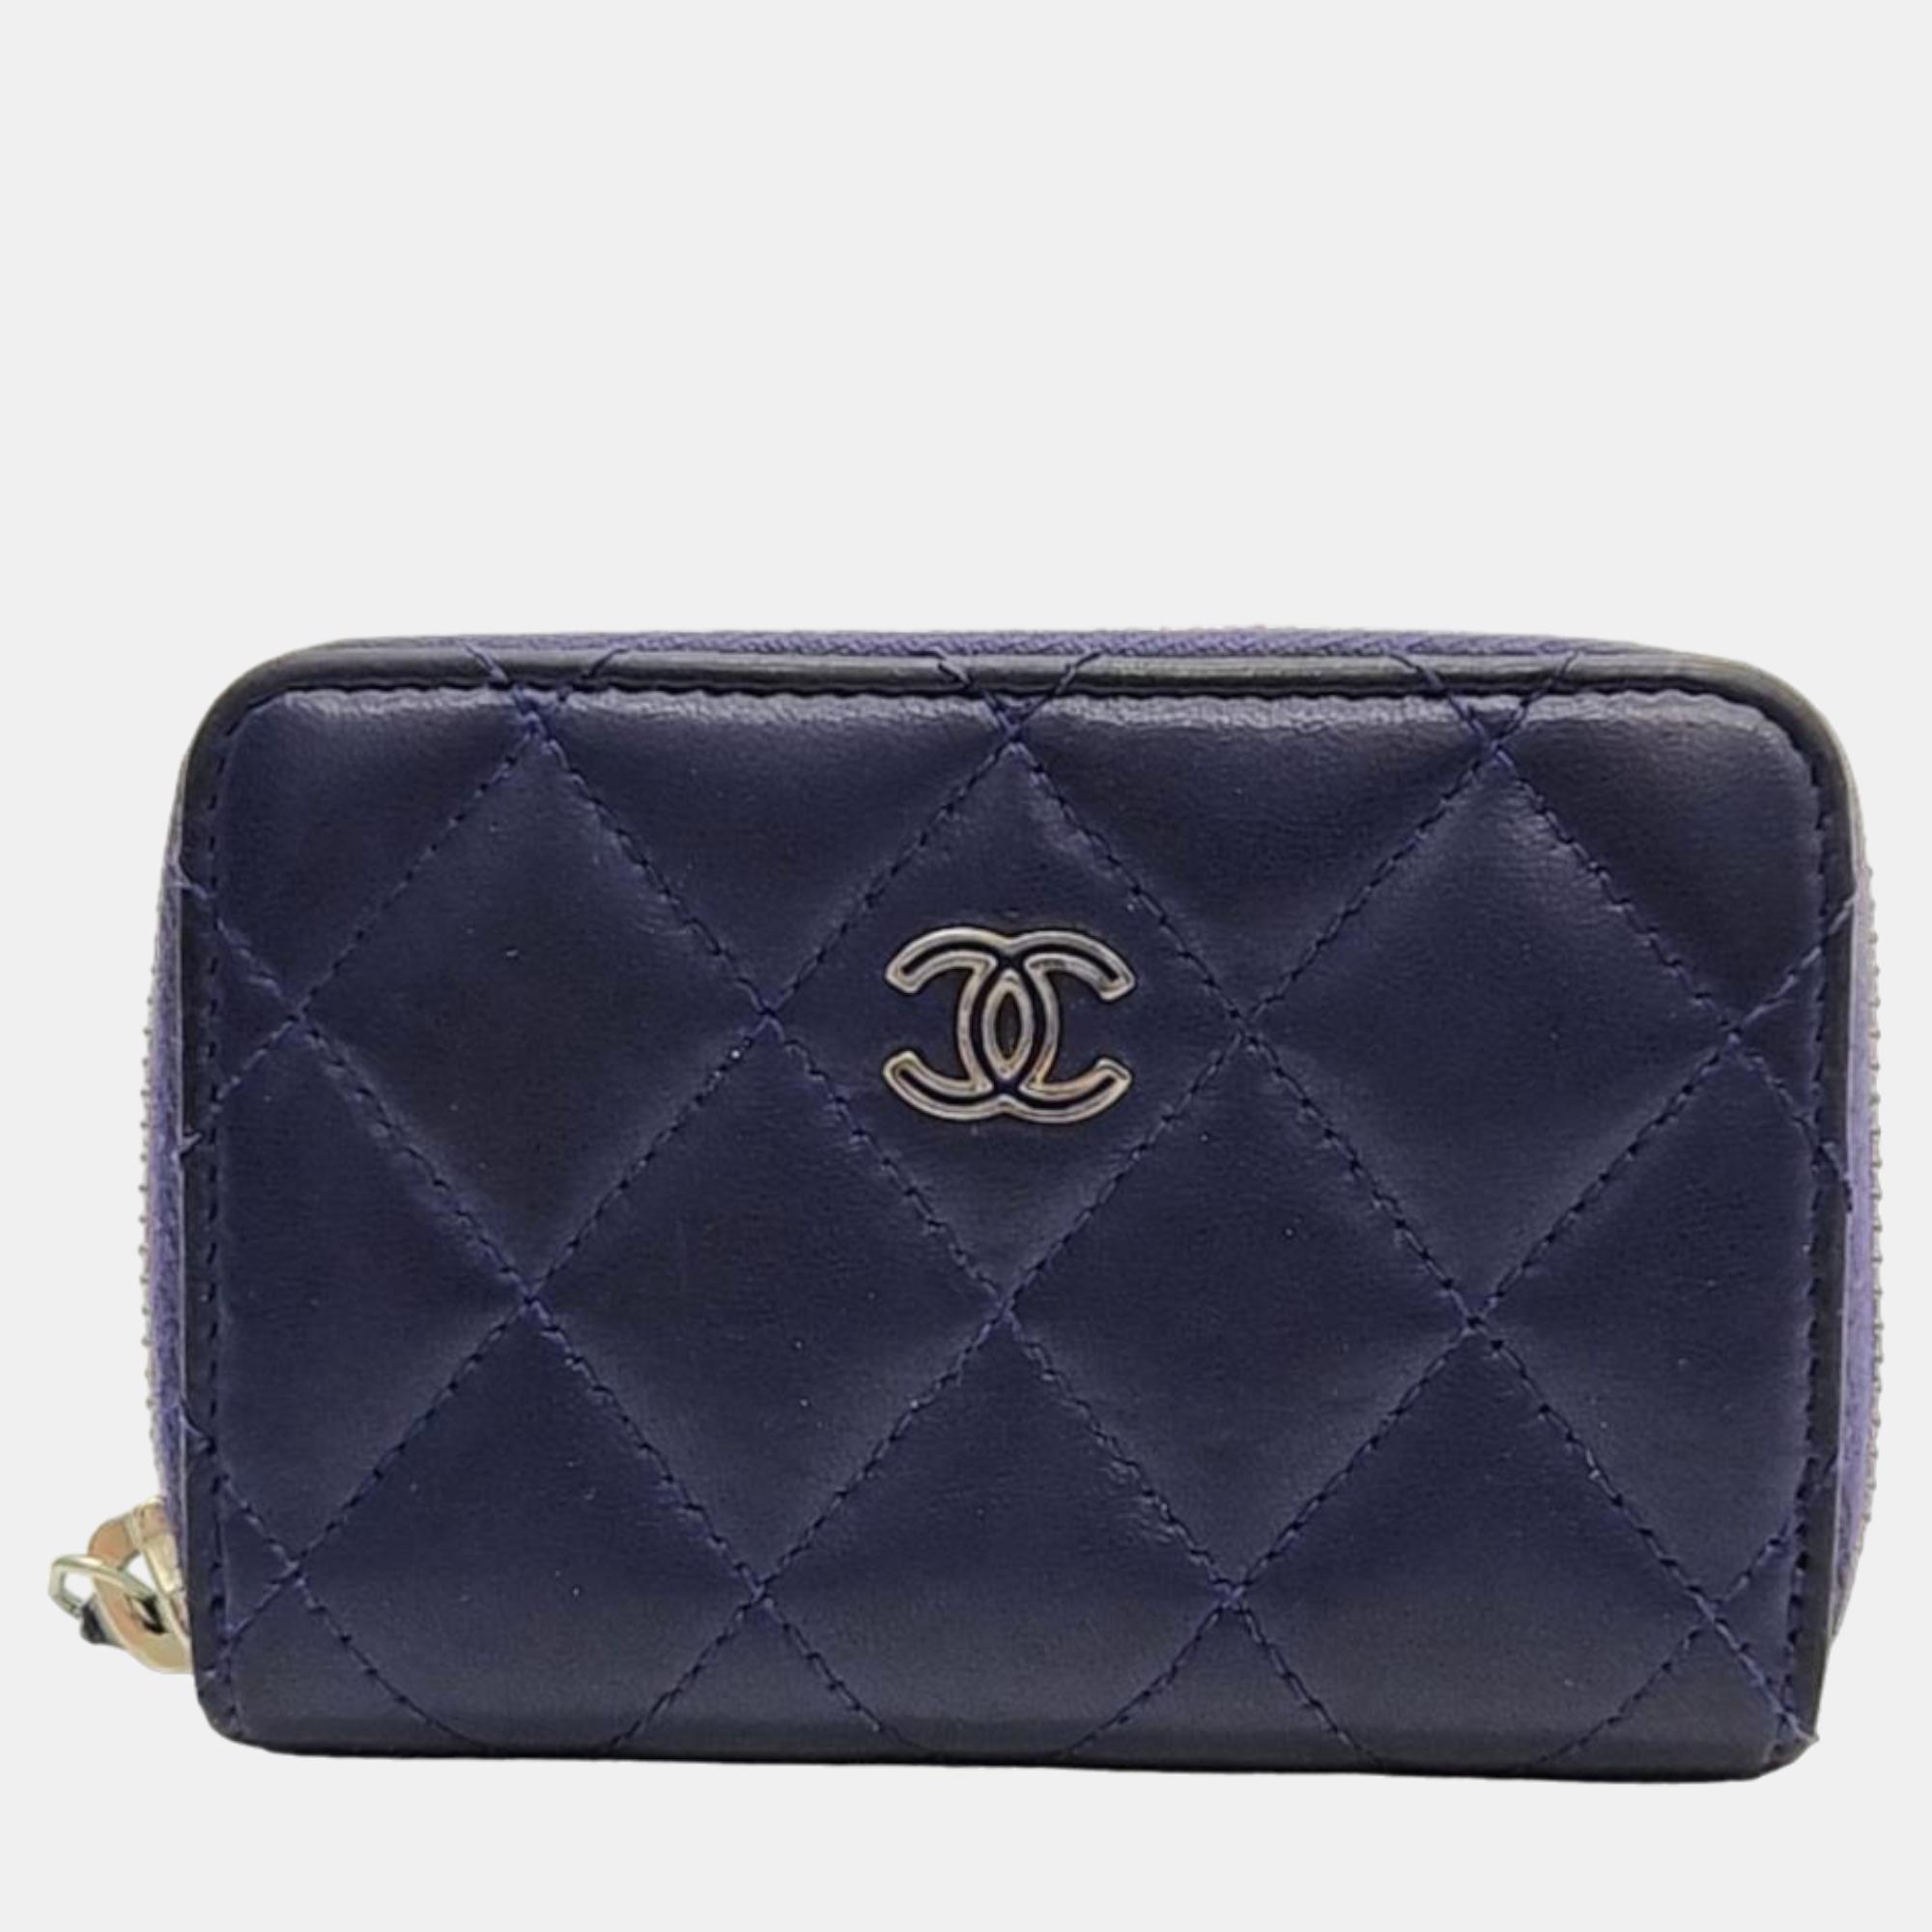 Chanel navy blue card wallet